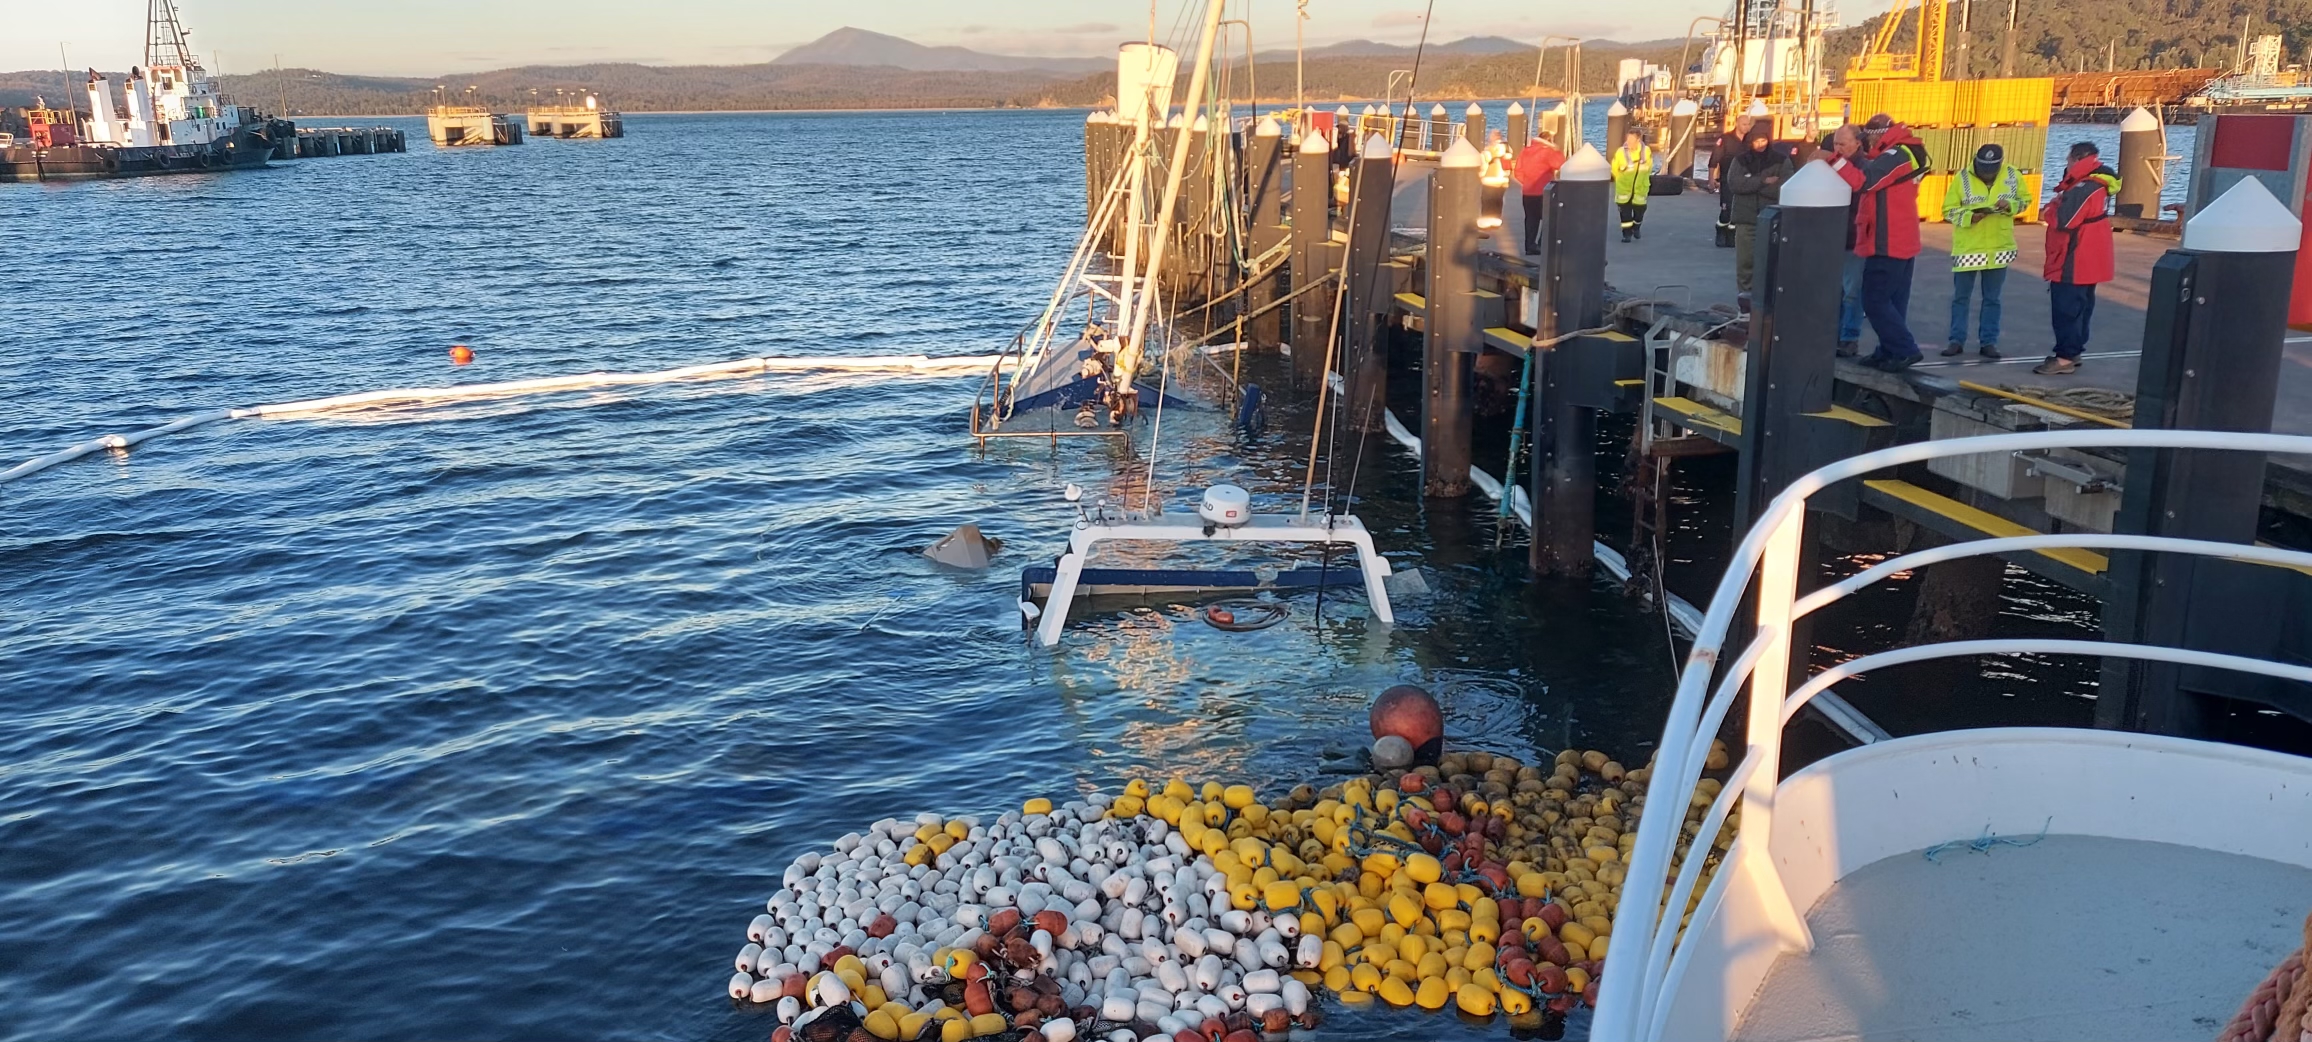 UPDATED: Boat with 50 tonnes of fish on board sinks in Eden